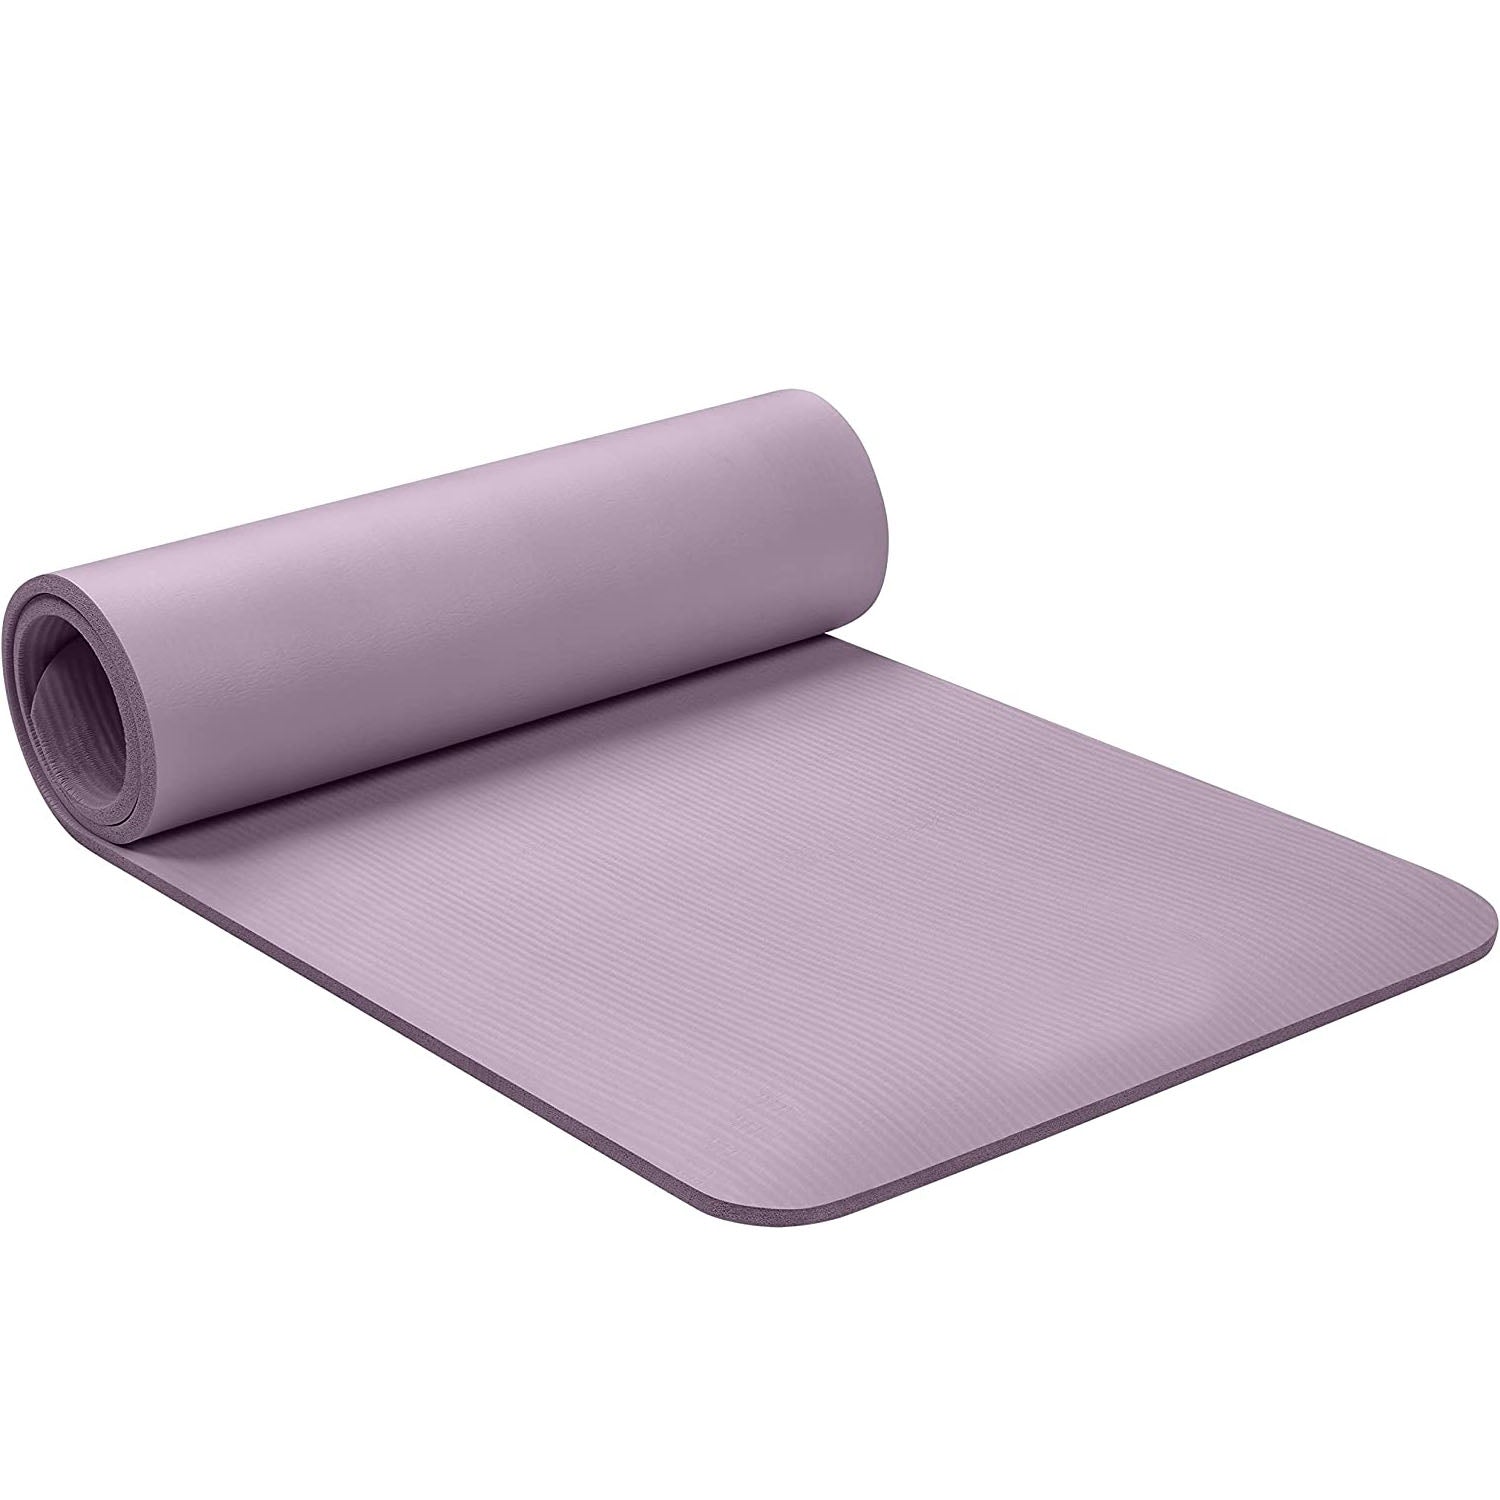 Sit Ups Assistance Device with 15mm Thick Yoga Mat - Madukani